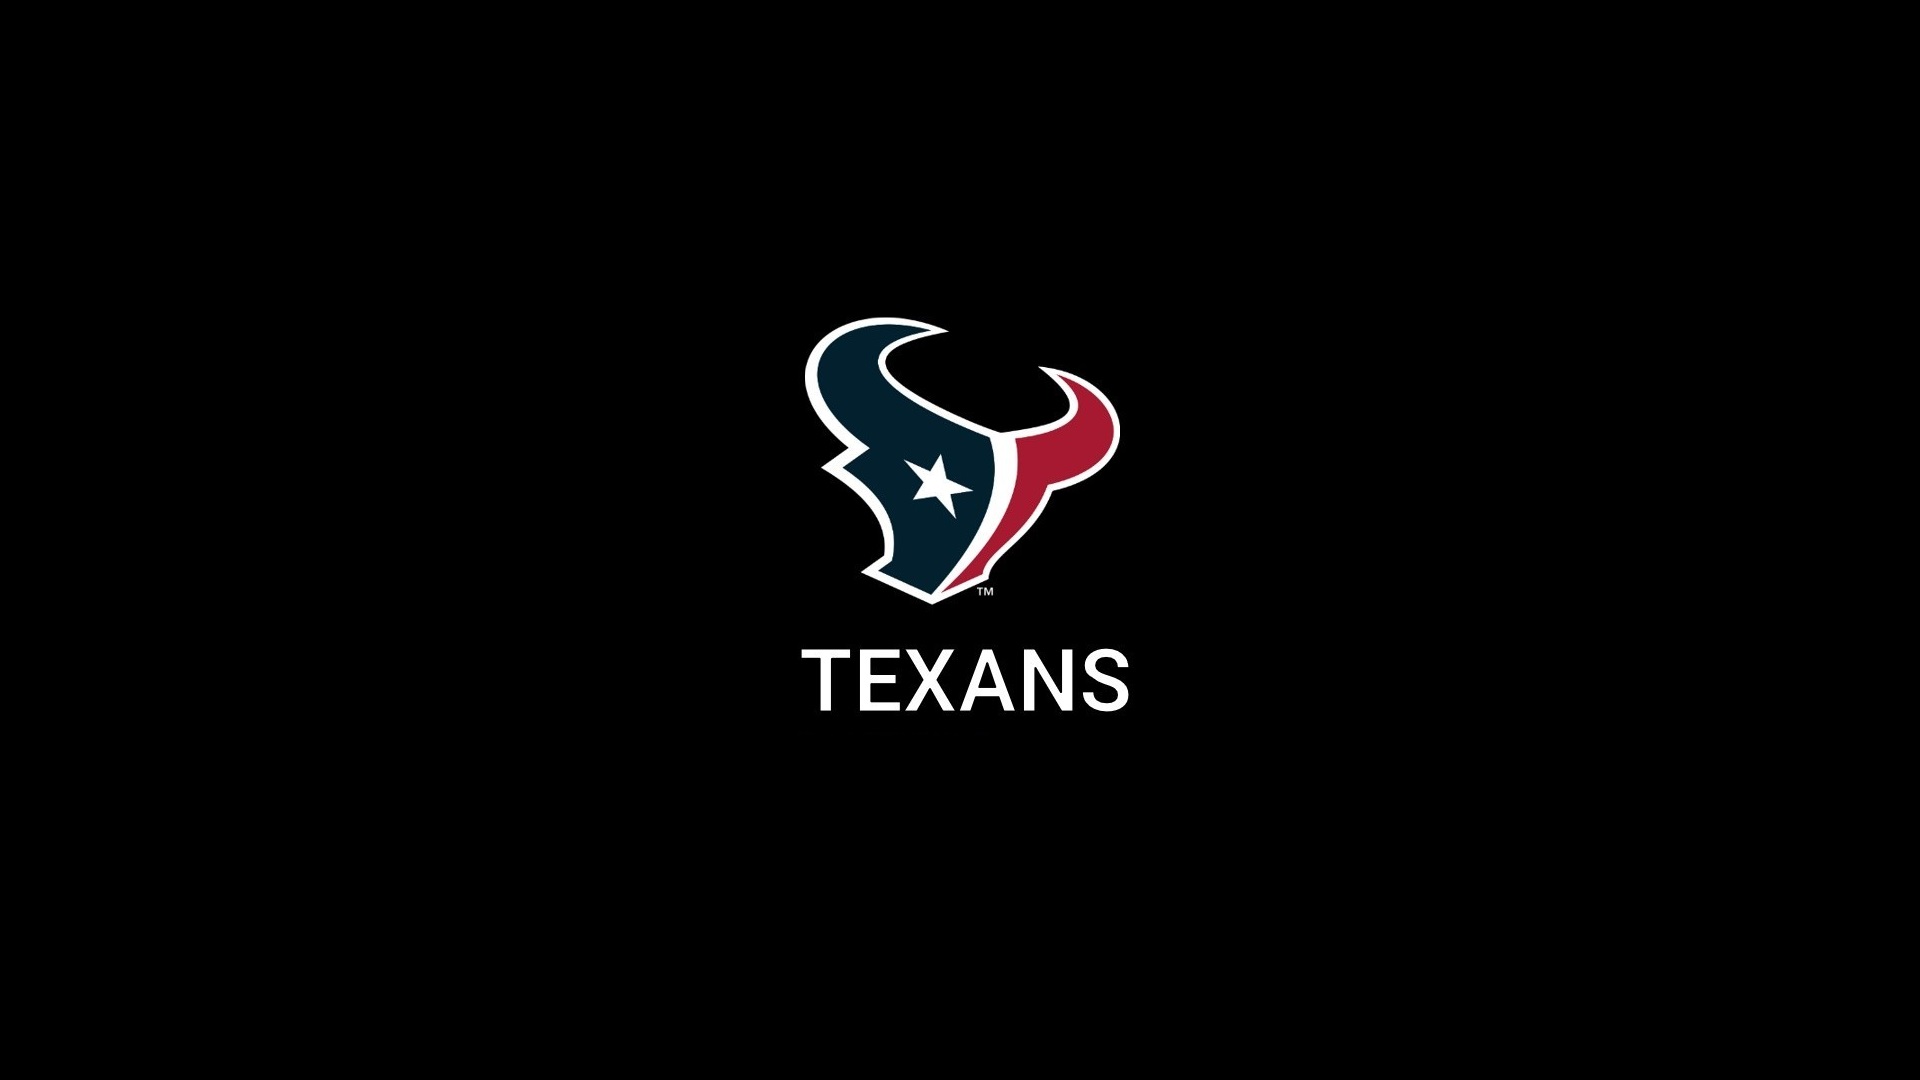 Houston Texans Desktop Backgrounds with high-resolution 1920x1080 pixel. Download and set as wallpaper for Desktop Computer, Apple iPhone X, XS Max, XR, 8, 7, 6, SE, iPad, Android